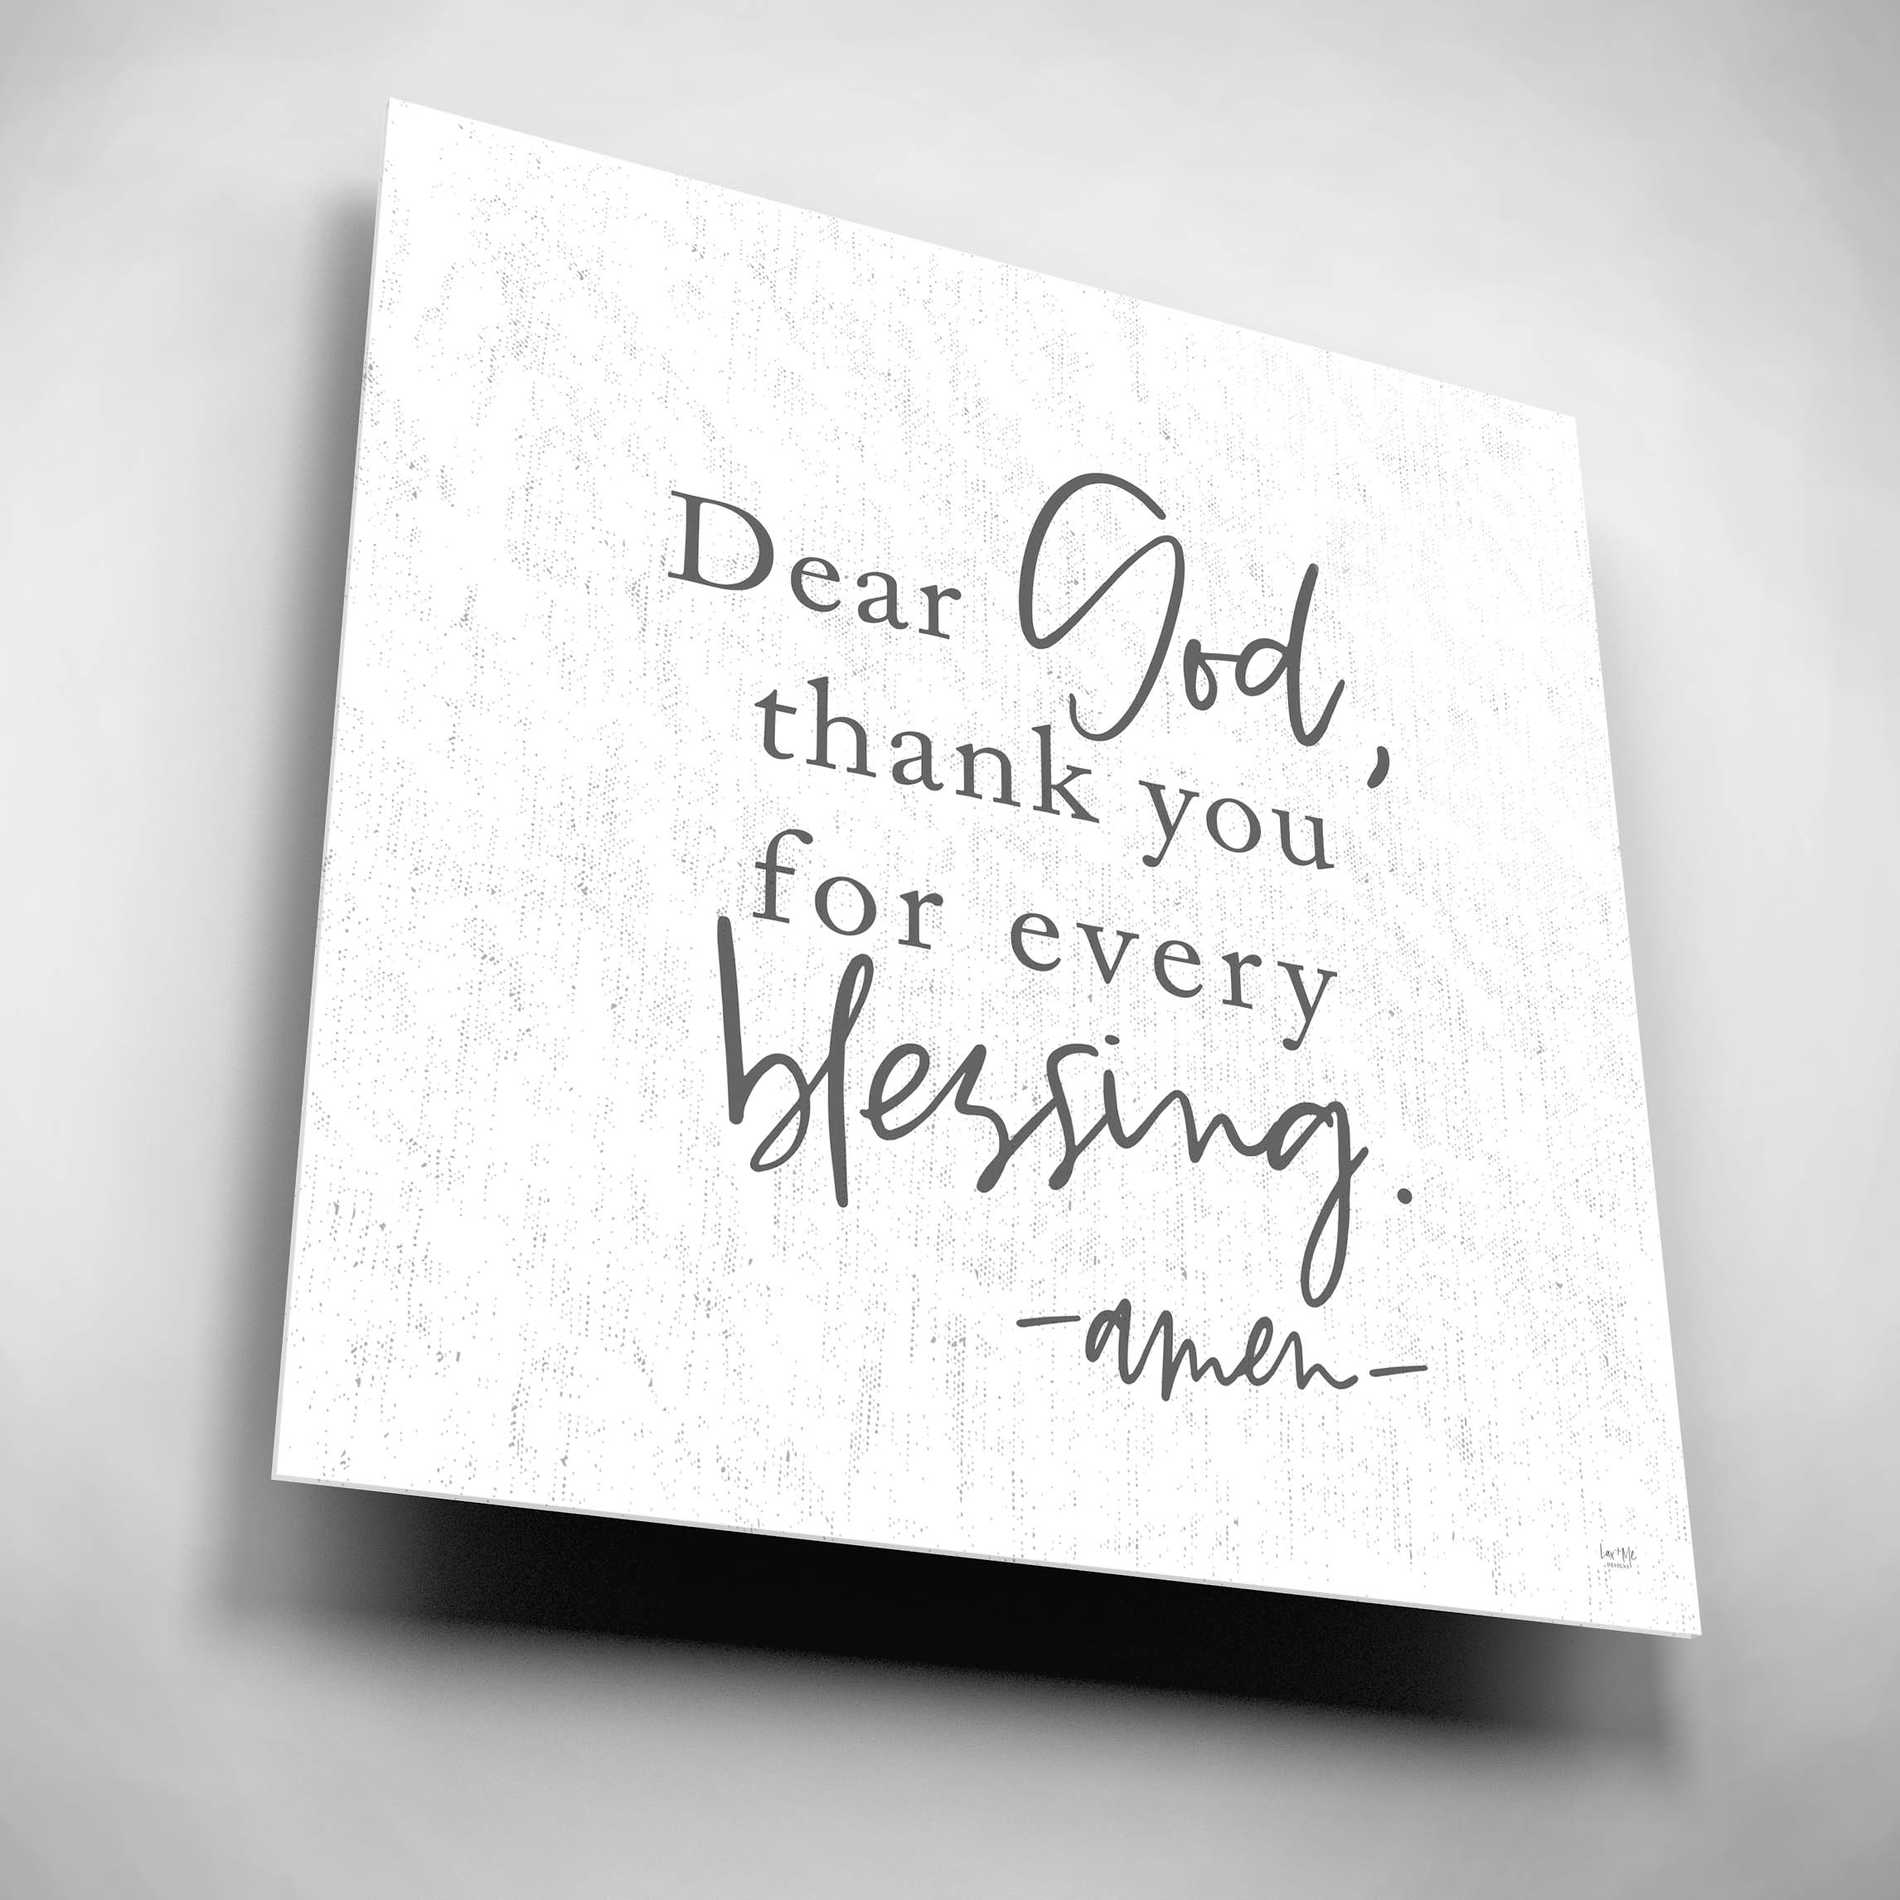 Epic Art 'Thank You for Every Blessing' by Lux + Me, Acrylic Glass Wall Art,12x12